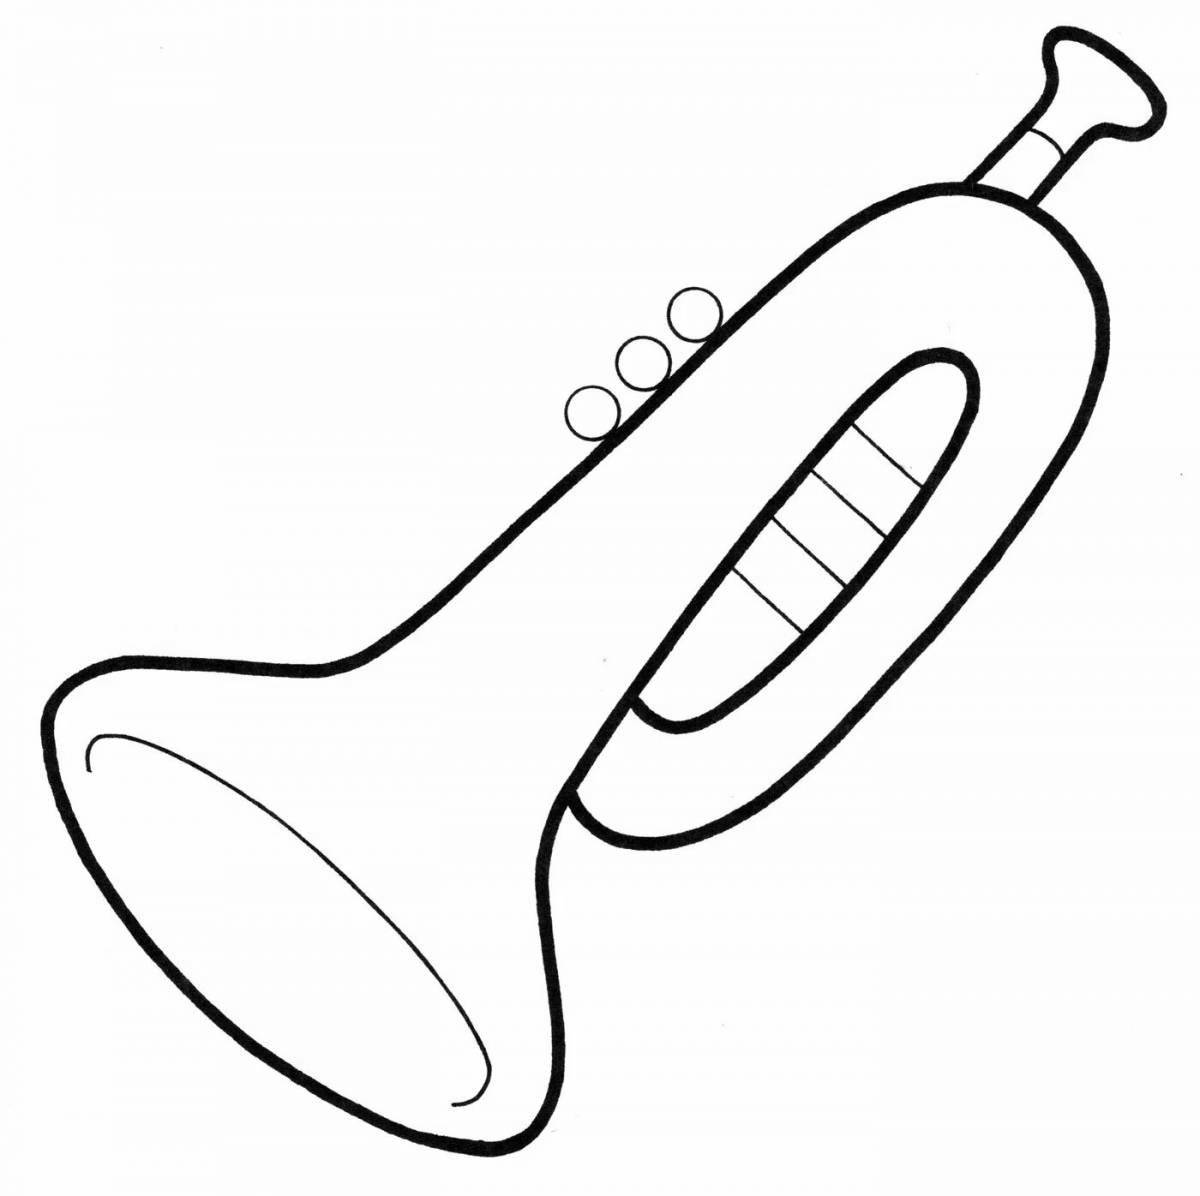 Adorable trumpet coloring book for kids